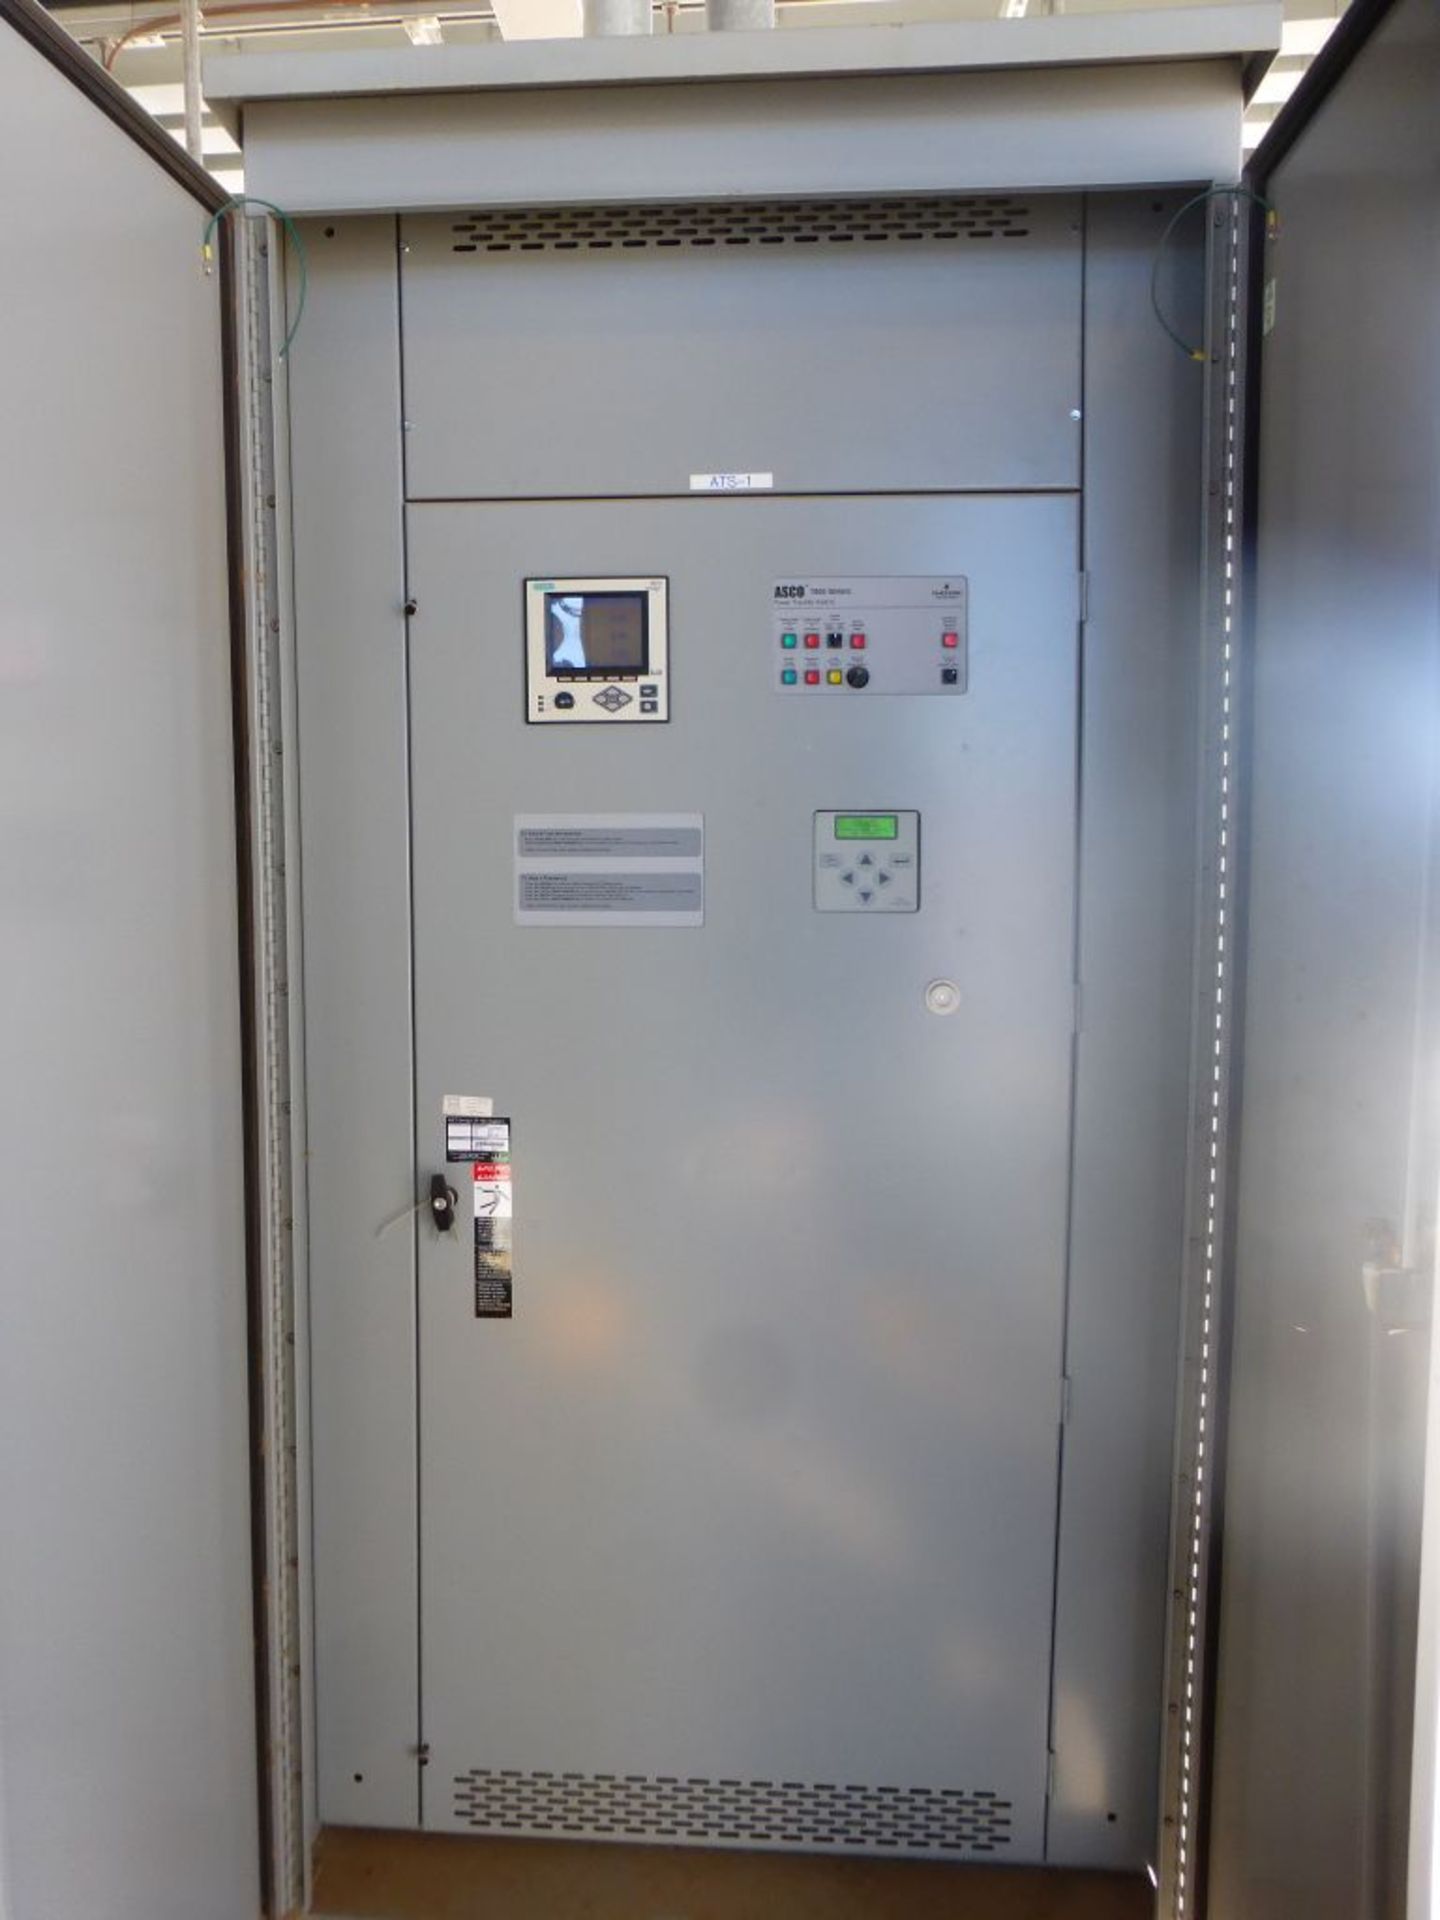 ASCO 7000 Series Power Transfer Switch | Lot Loading Fee: $50 | 800A; 480V; Tag: 233663 - Image 4 of 12